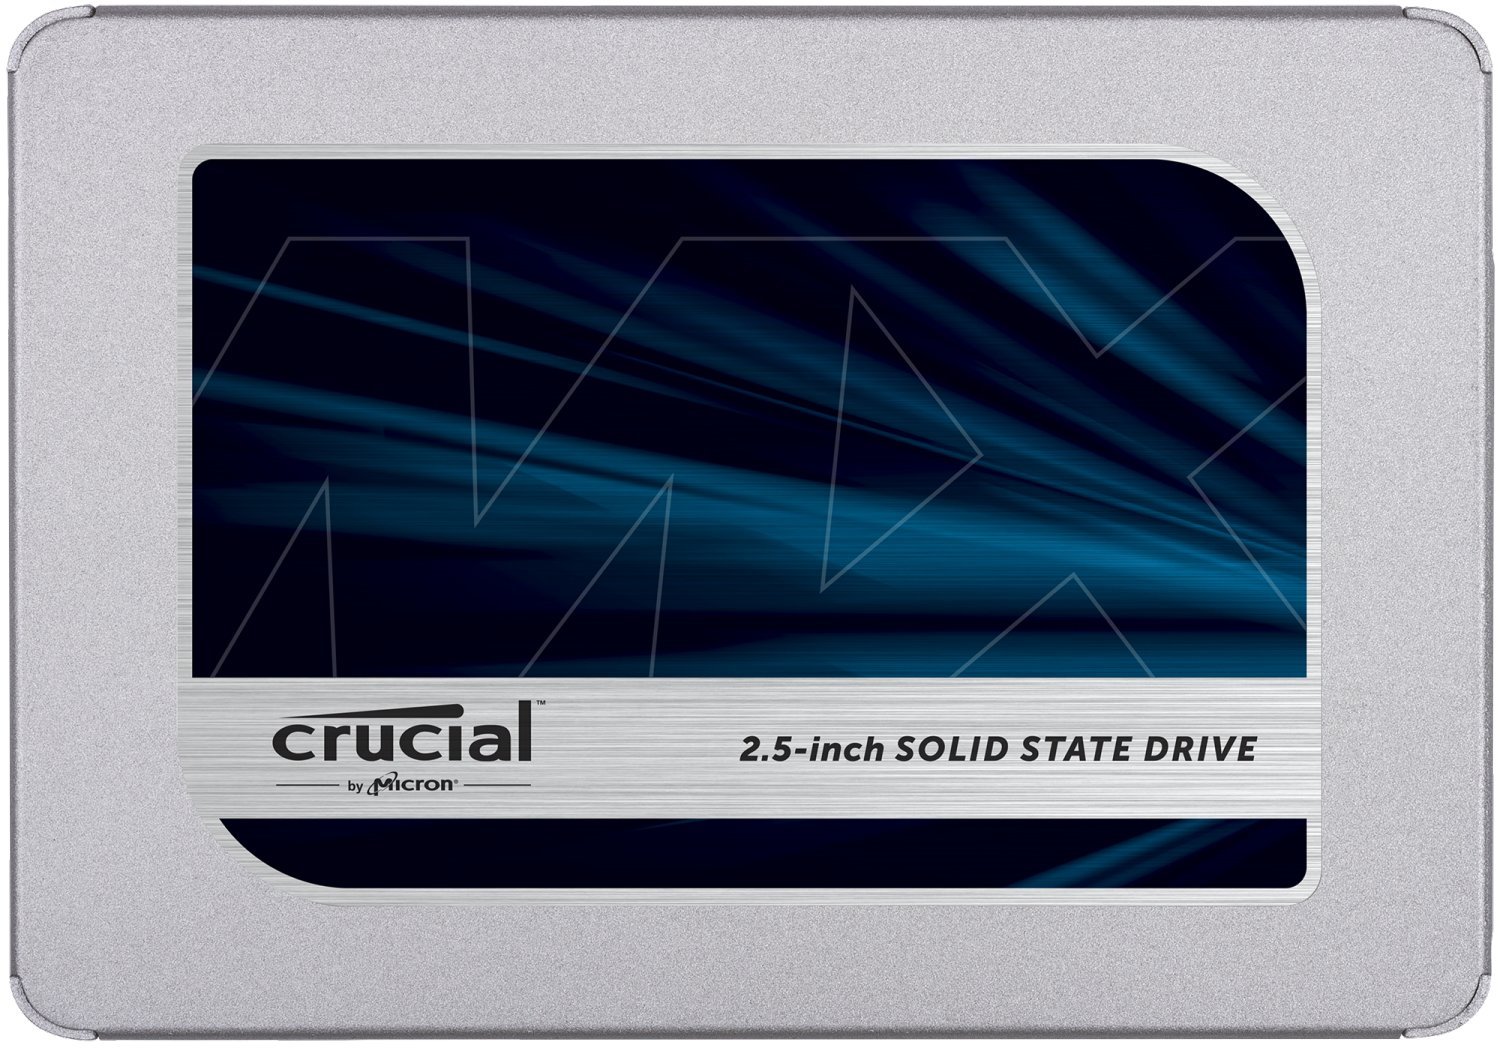 Crucial MX500 3D NAND 2.5" SATA Solid State Drive: 1TB $52, 2TB $108 + Free Shipping